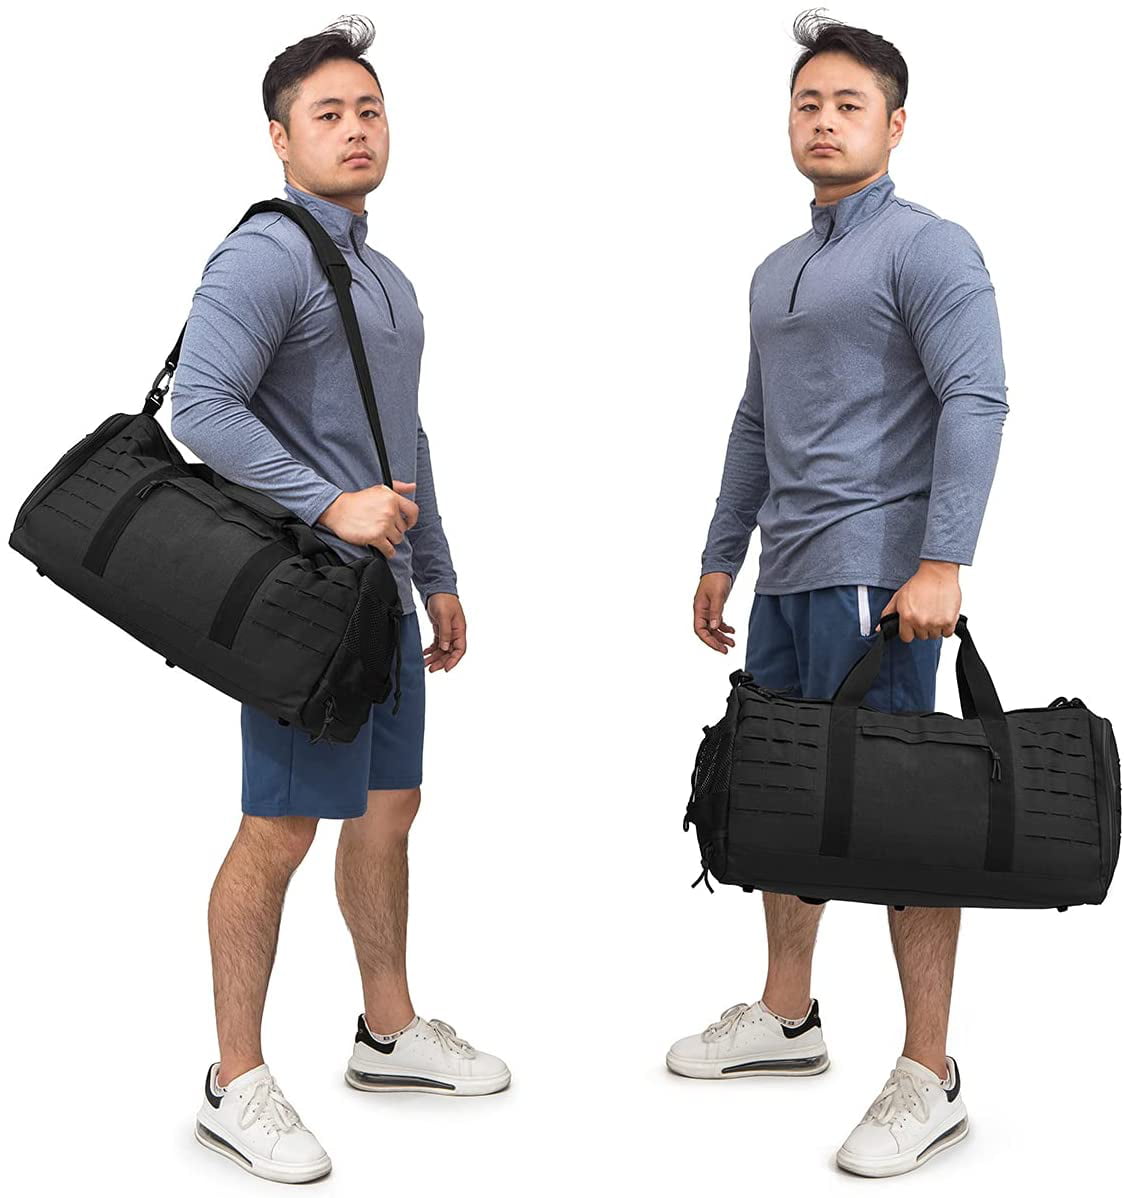 QT&QY 40L Military Tactical Duffle Bag For Men Sport Gym Bag Fitness Tote Travel Duffle Bag Training Workout Bag With Shoe Compartment Basketball Football Weekender Bag 